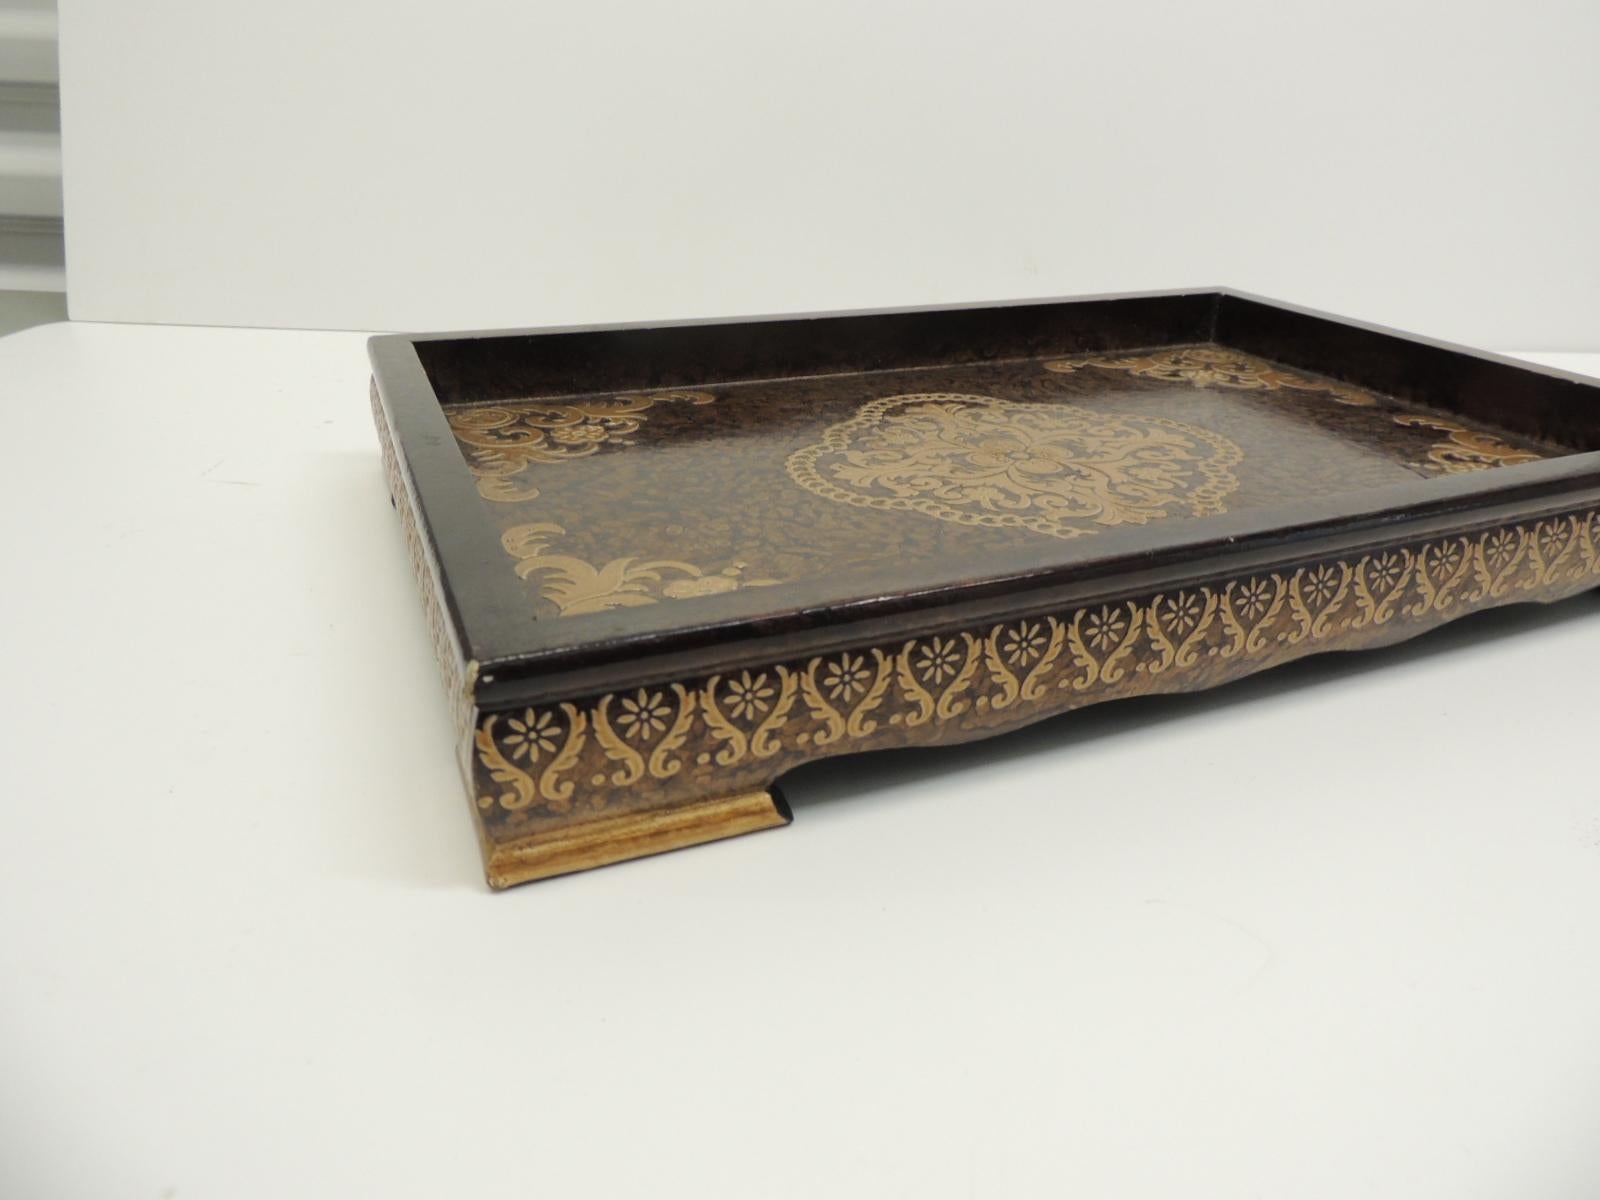 Asian lacquered decorative modern tray in brown and gold
Asian lacquered decorative tray with edged wood and floral details all around in brown and gold. Textured finish on the top.
Size: 15.5 x 10.5 x 2.